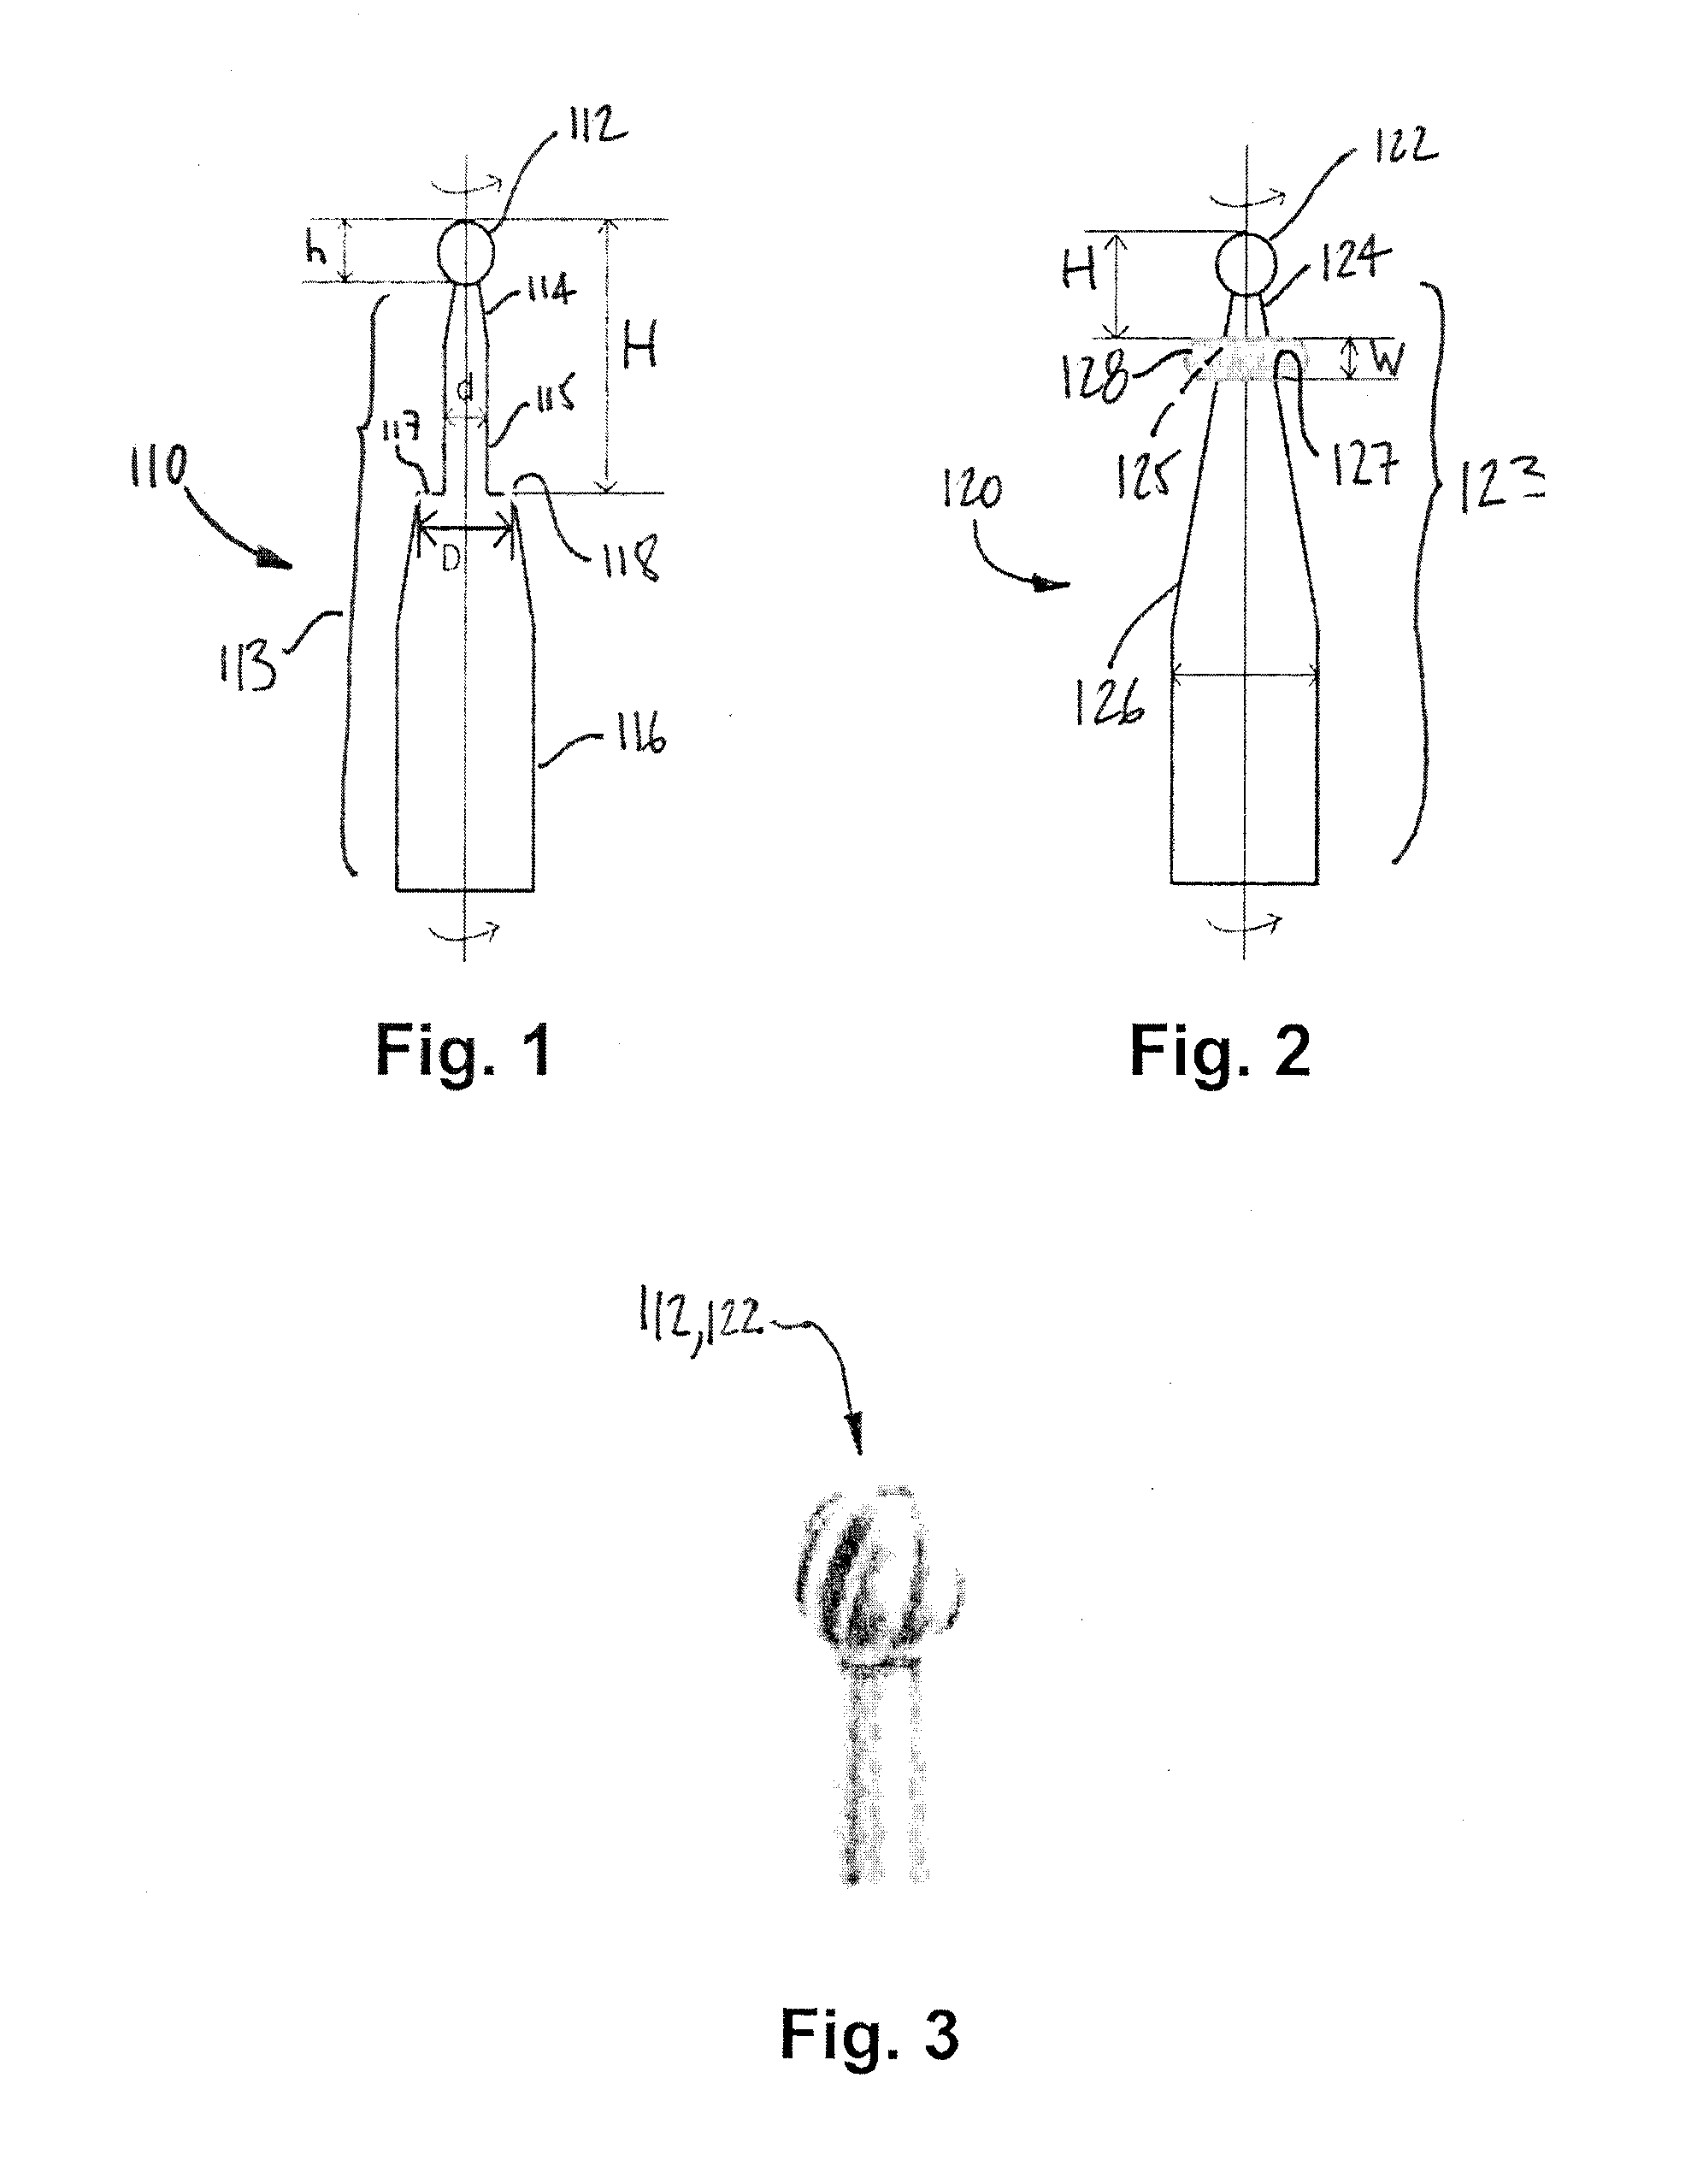 Drill burr and method for performing holes in subchondral bone to promote cartilage repair